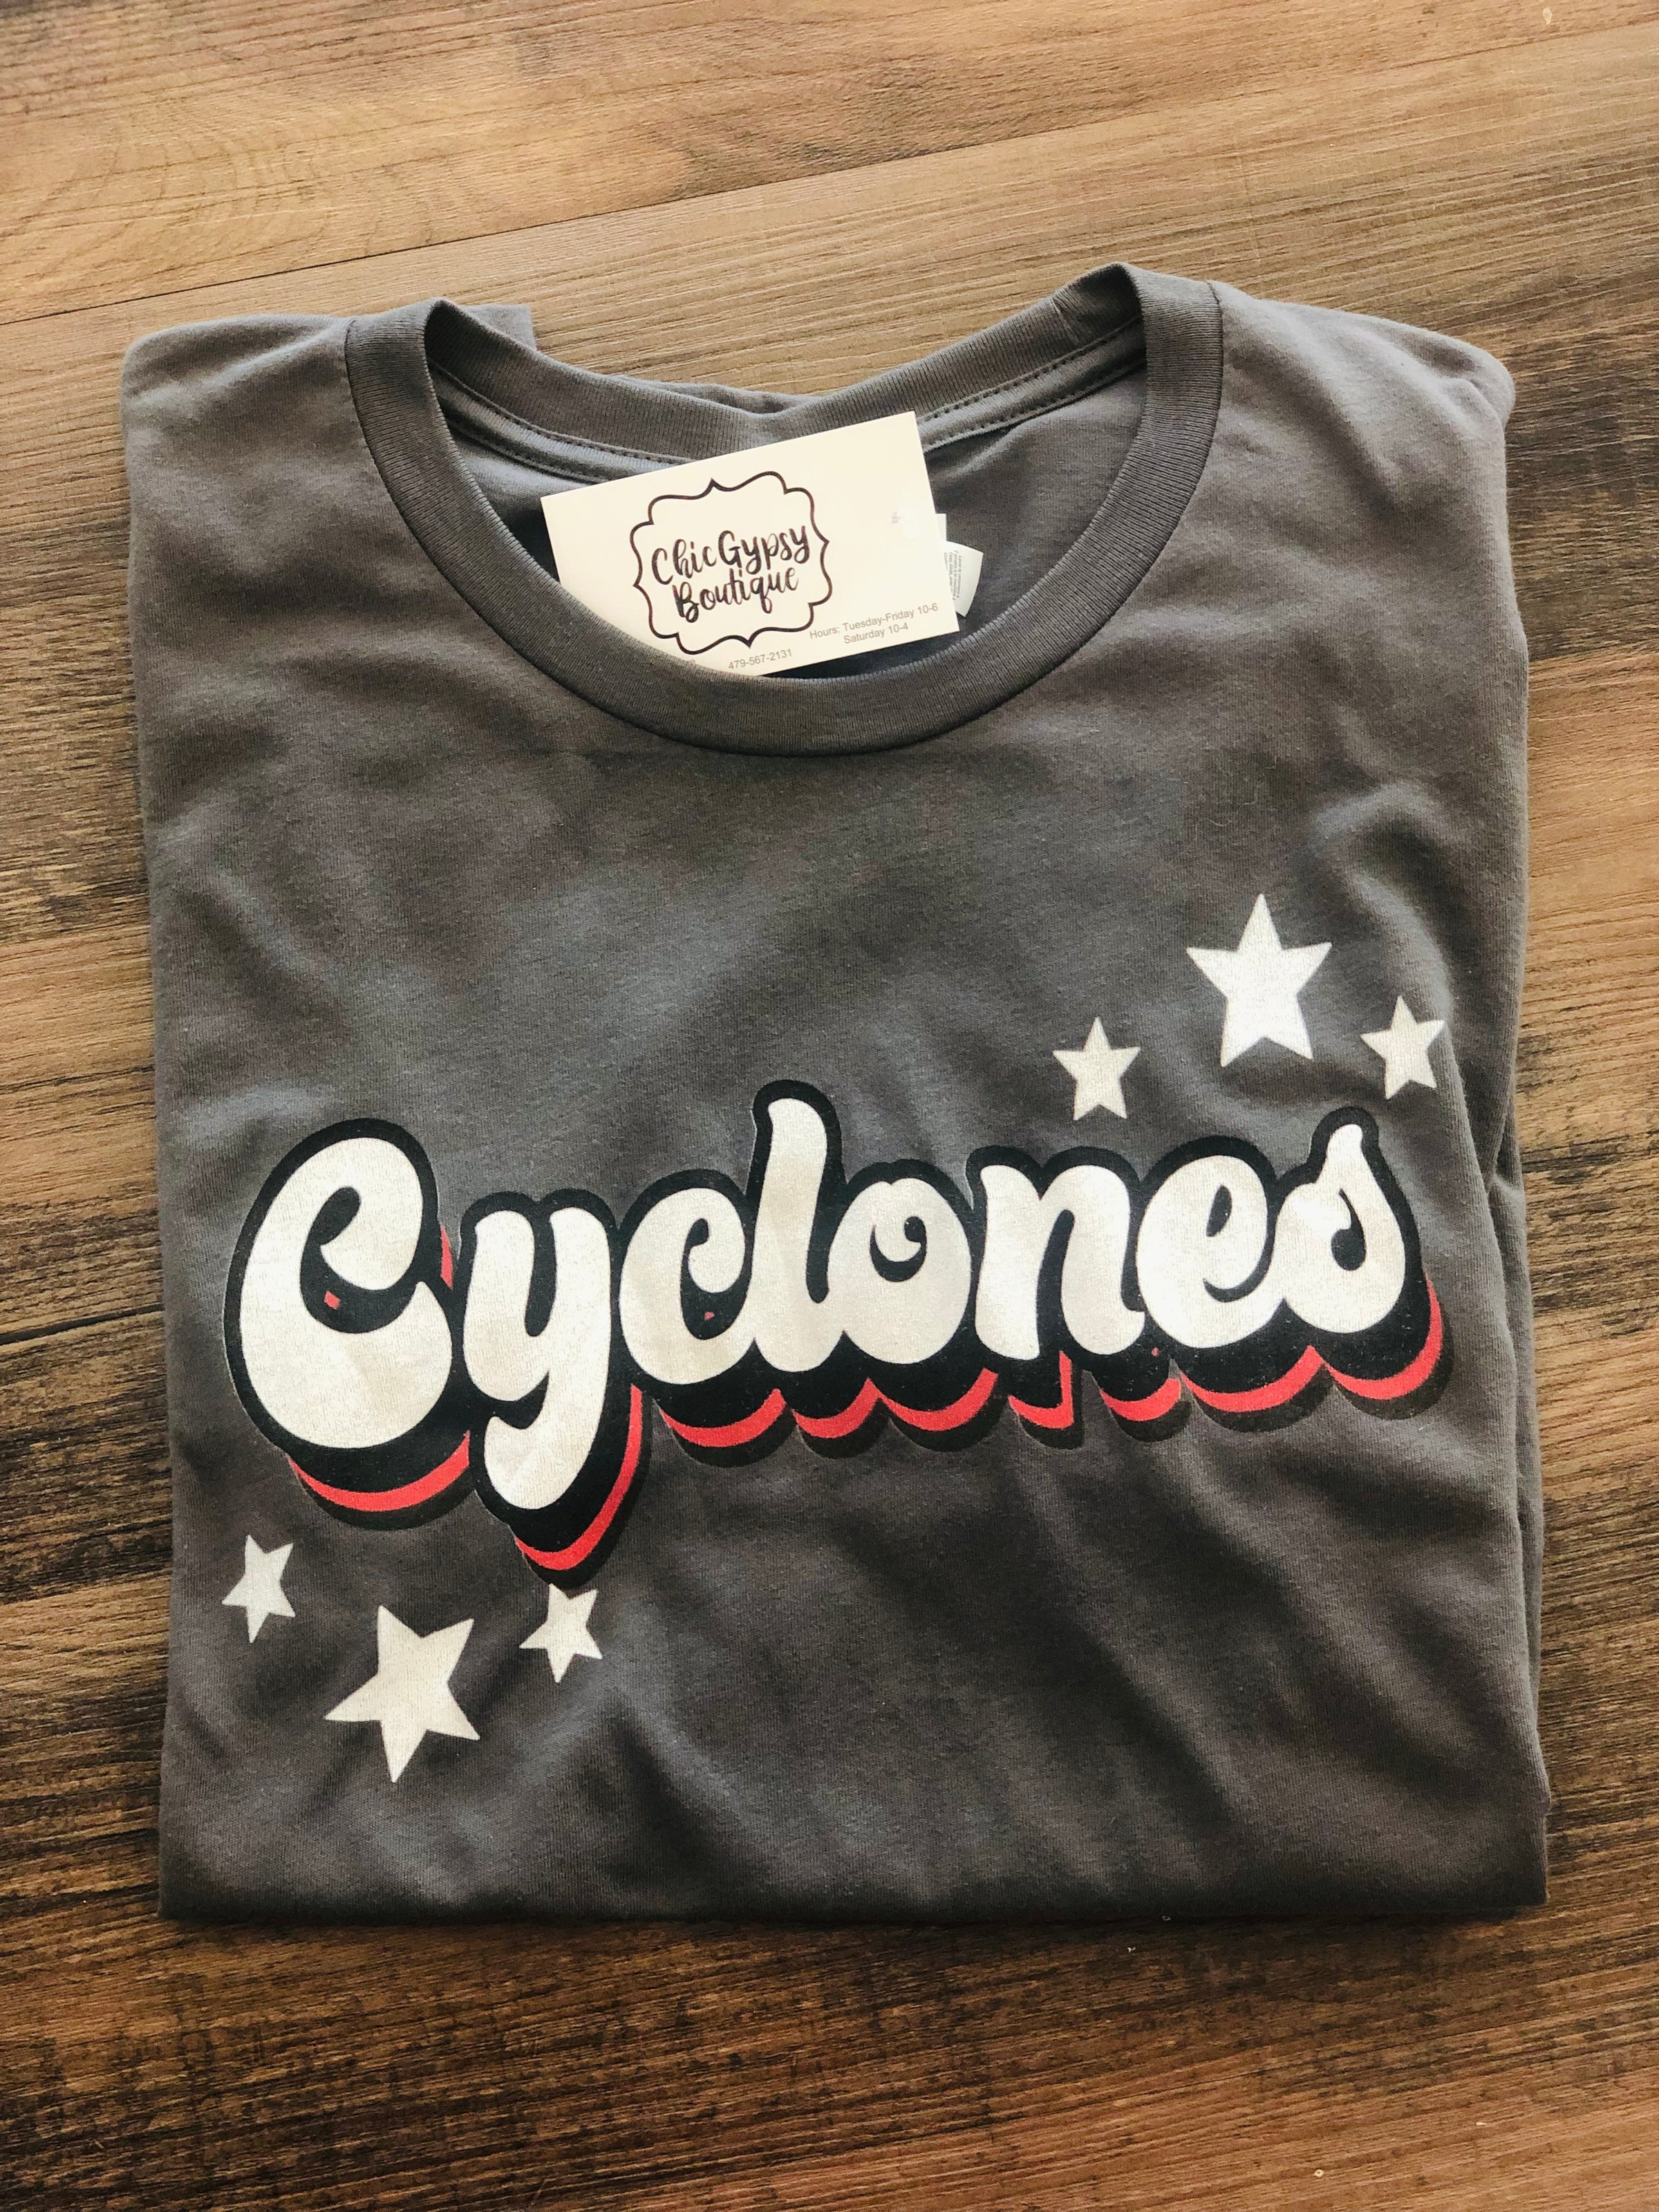 The Cyclone Top